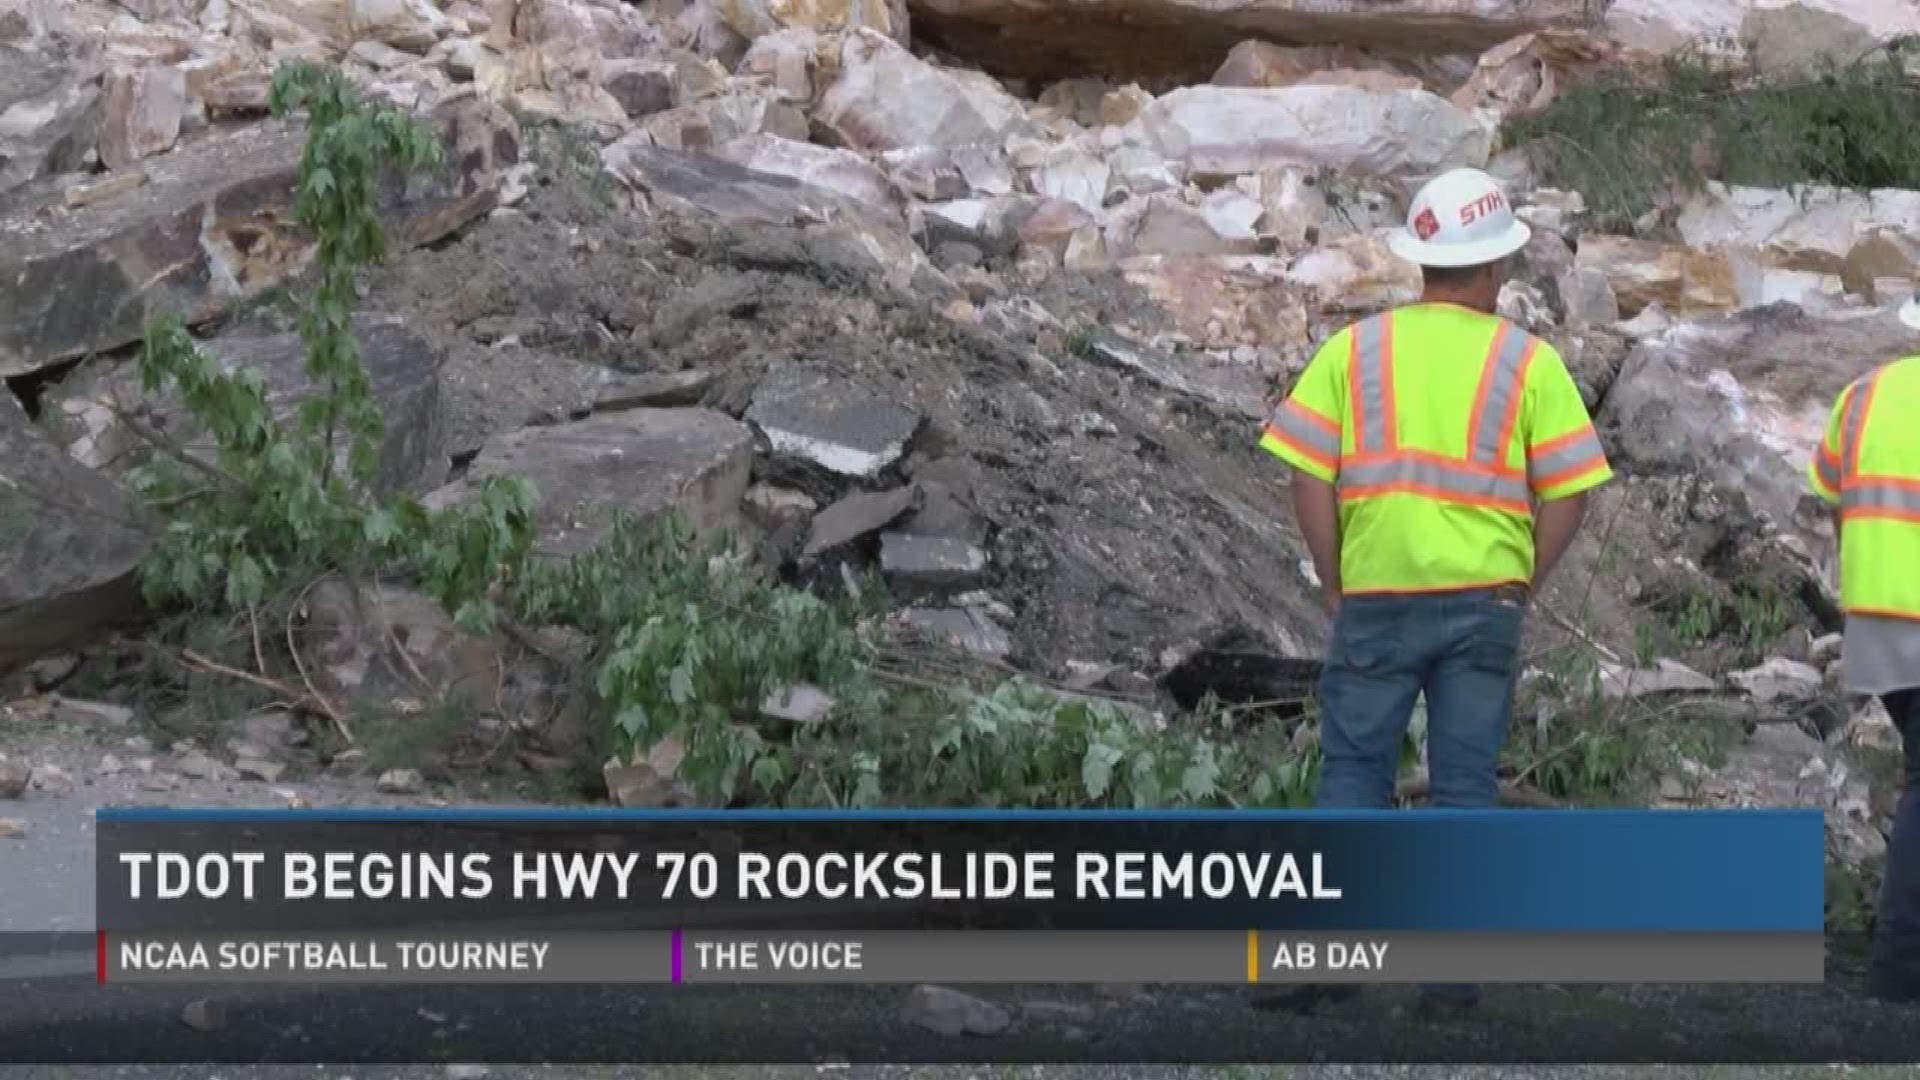 May 15, 2017: A massive rockslide has closed part of a Hawkins County highway.